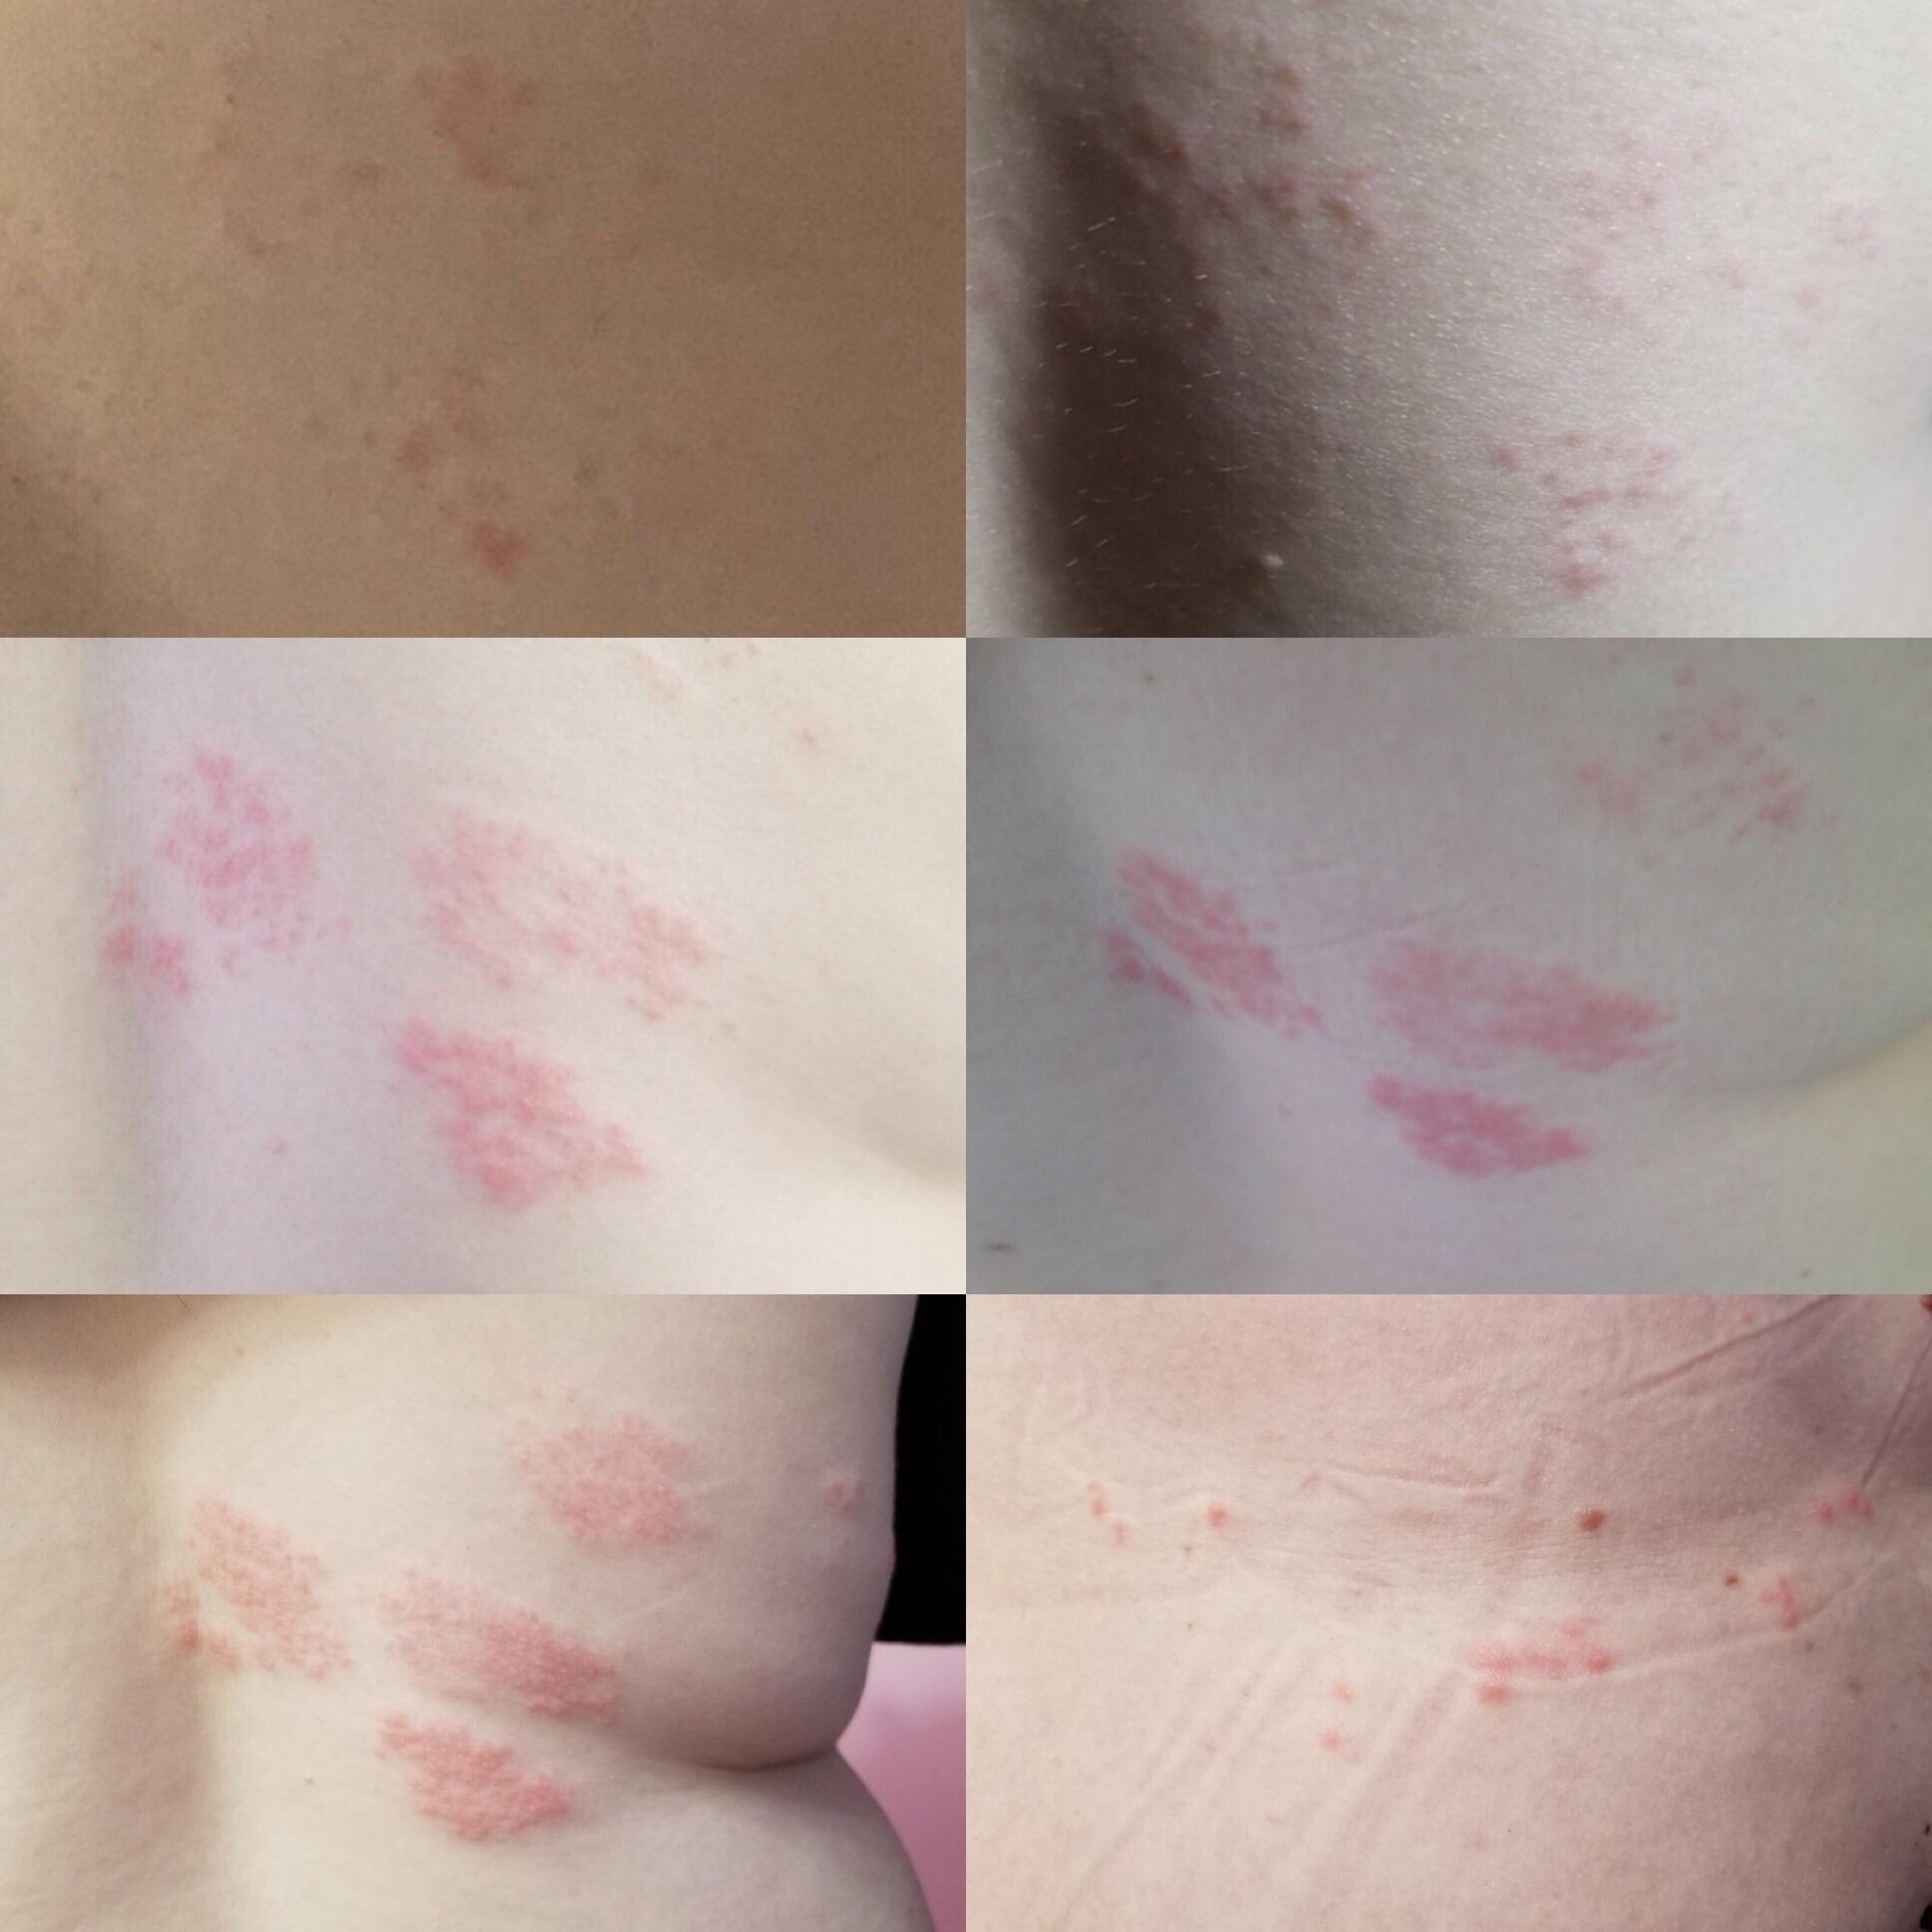 The progression of shingles over the last two weeks. Started out on my ...